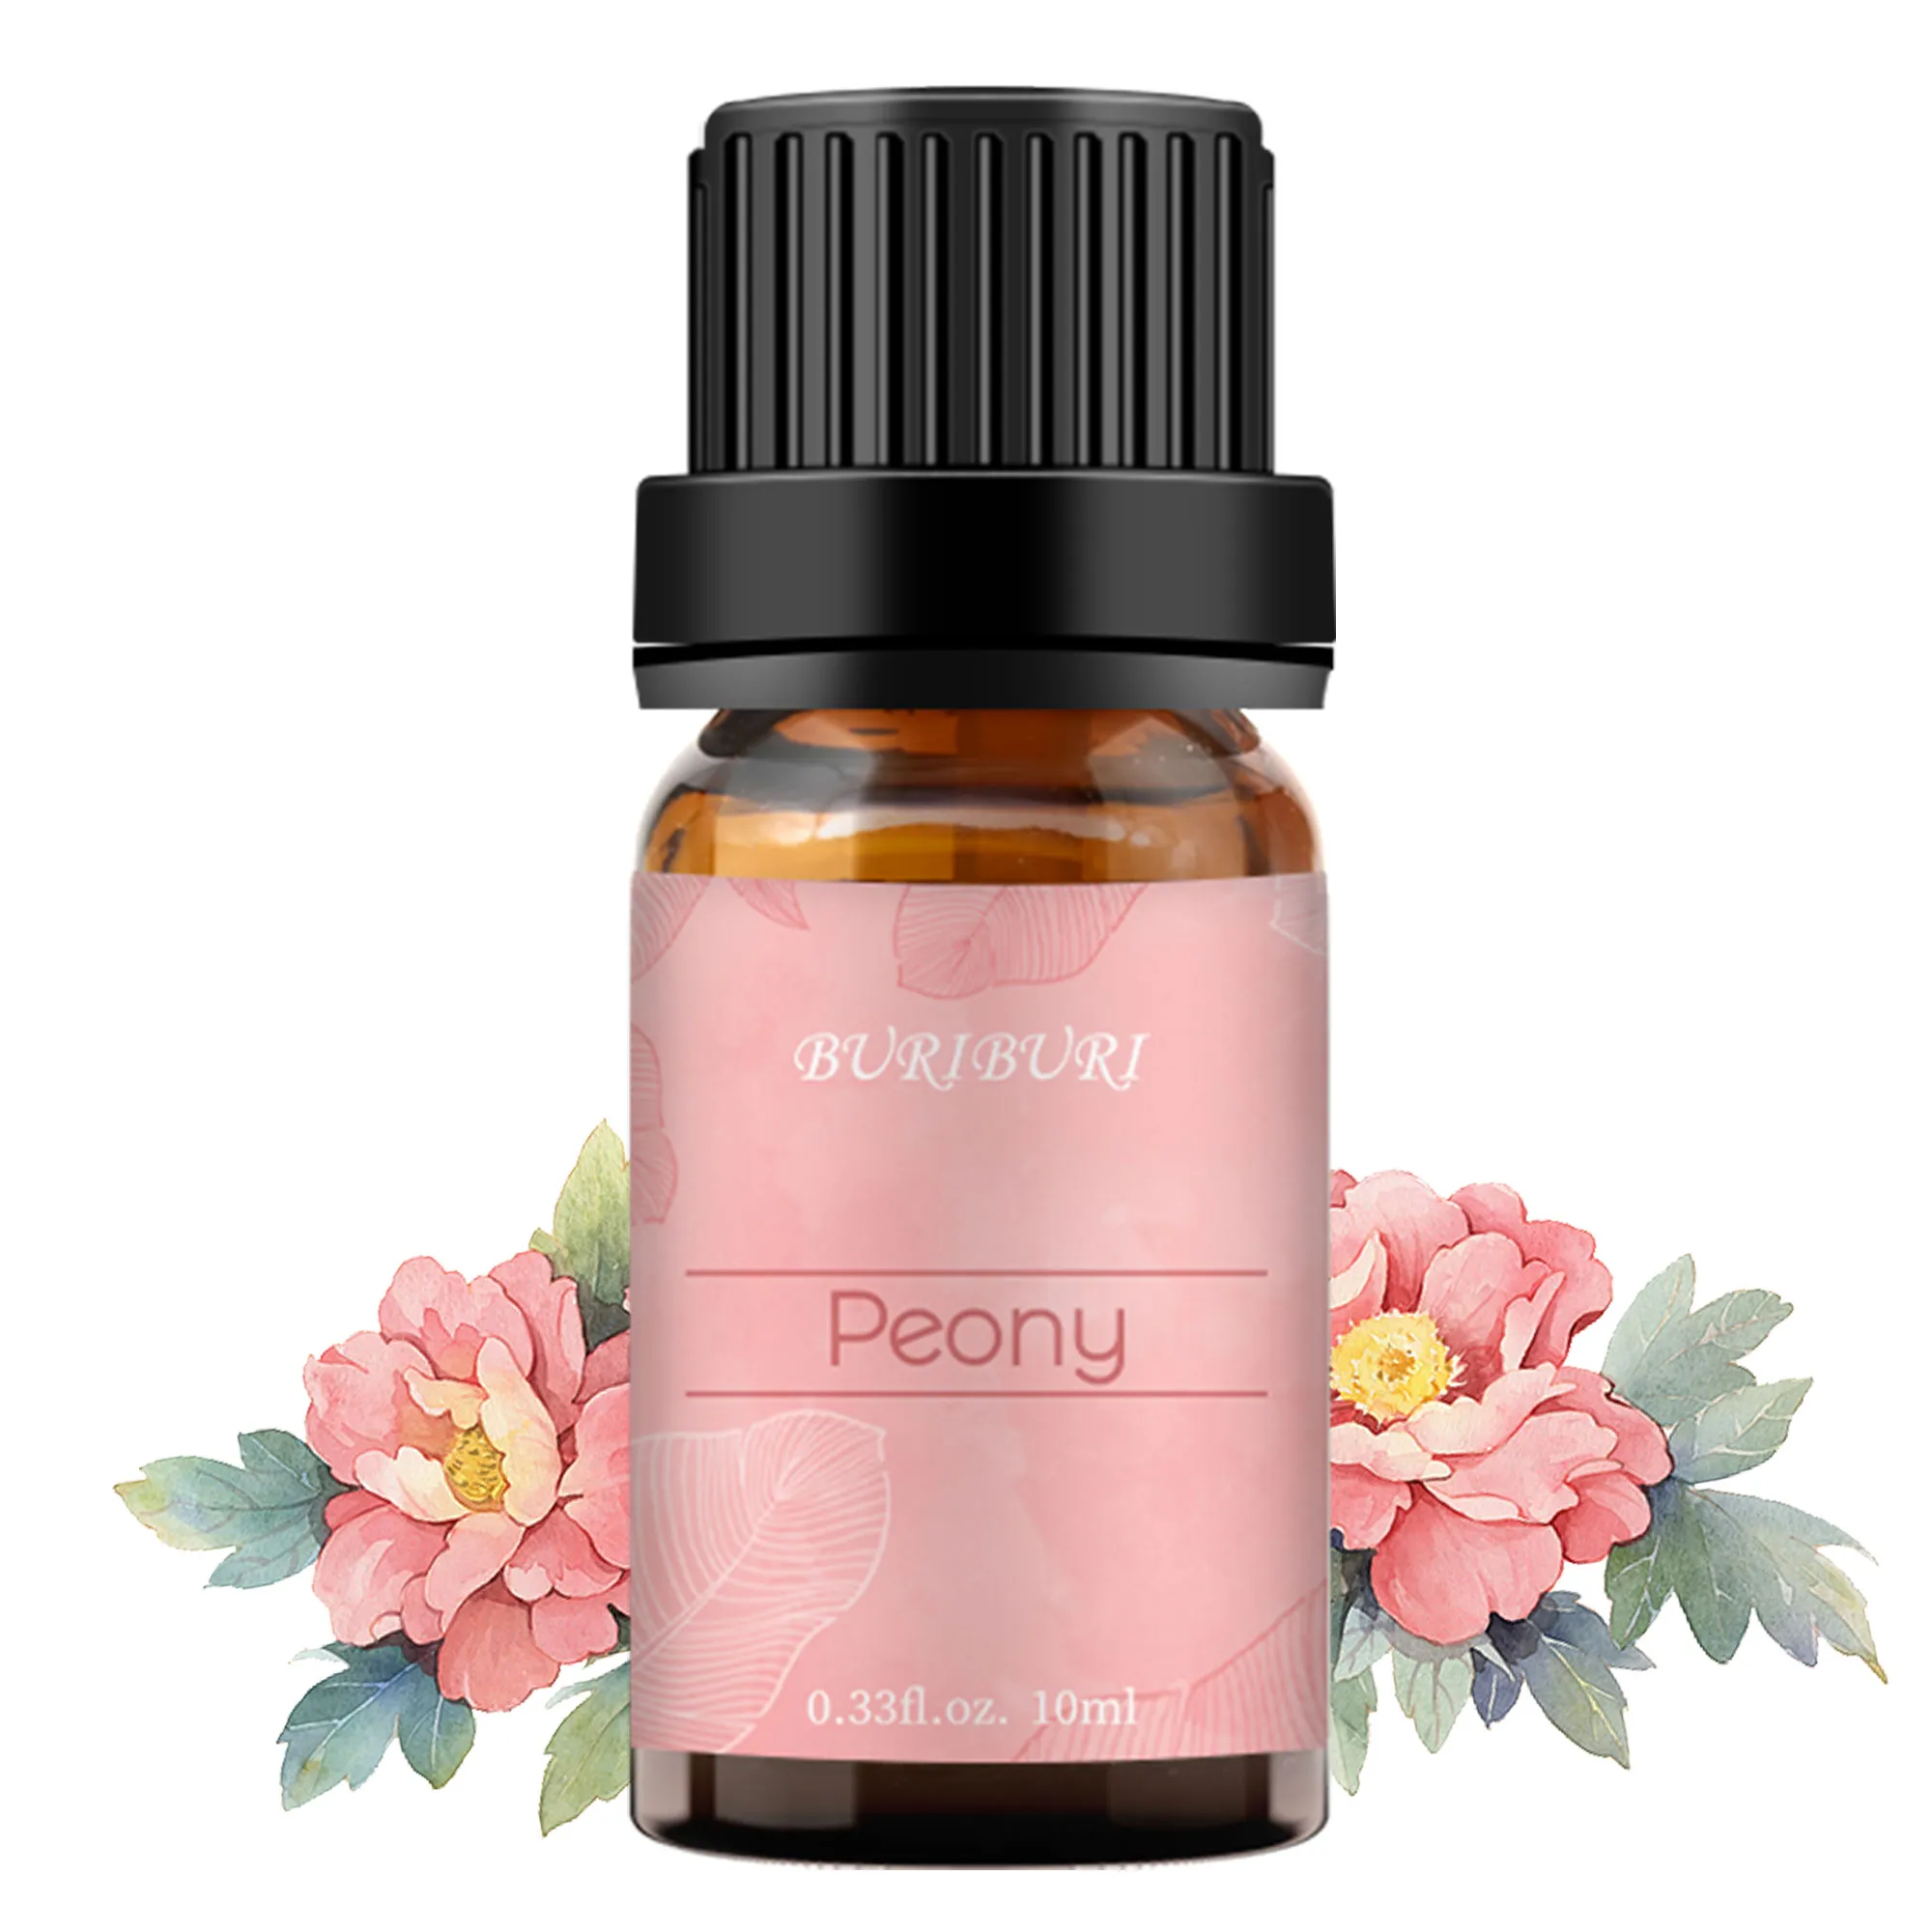 AKARZ Famous brand natural aromatherapy Peony essential oil